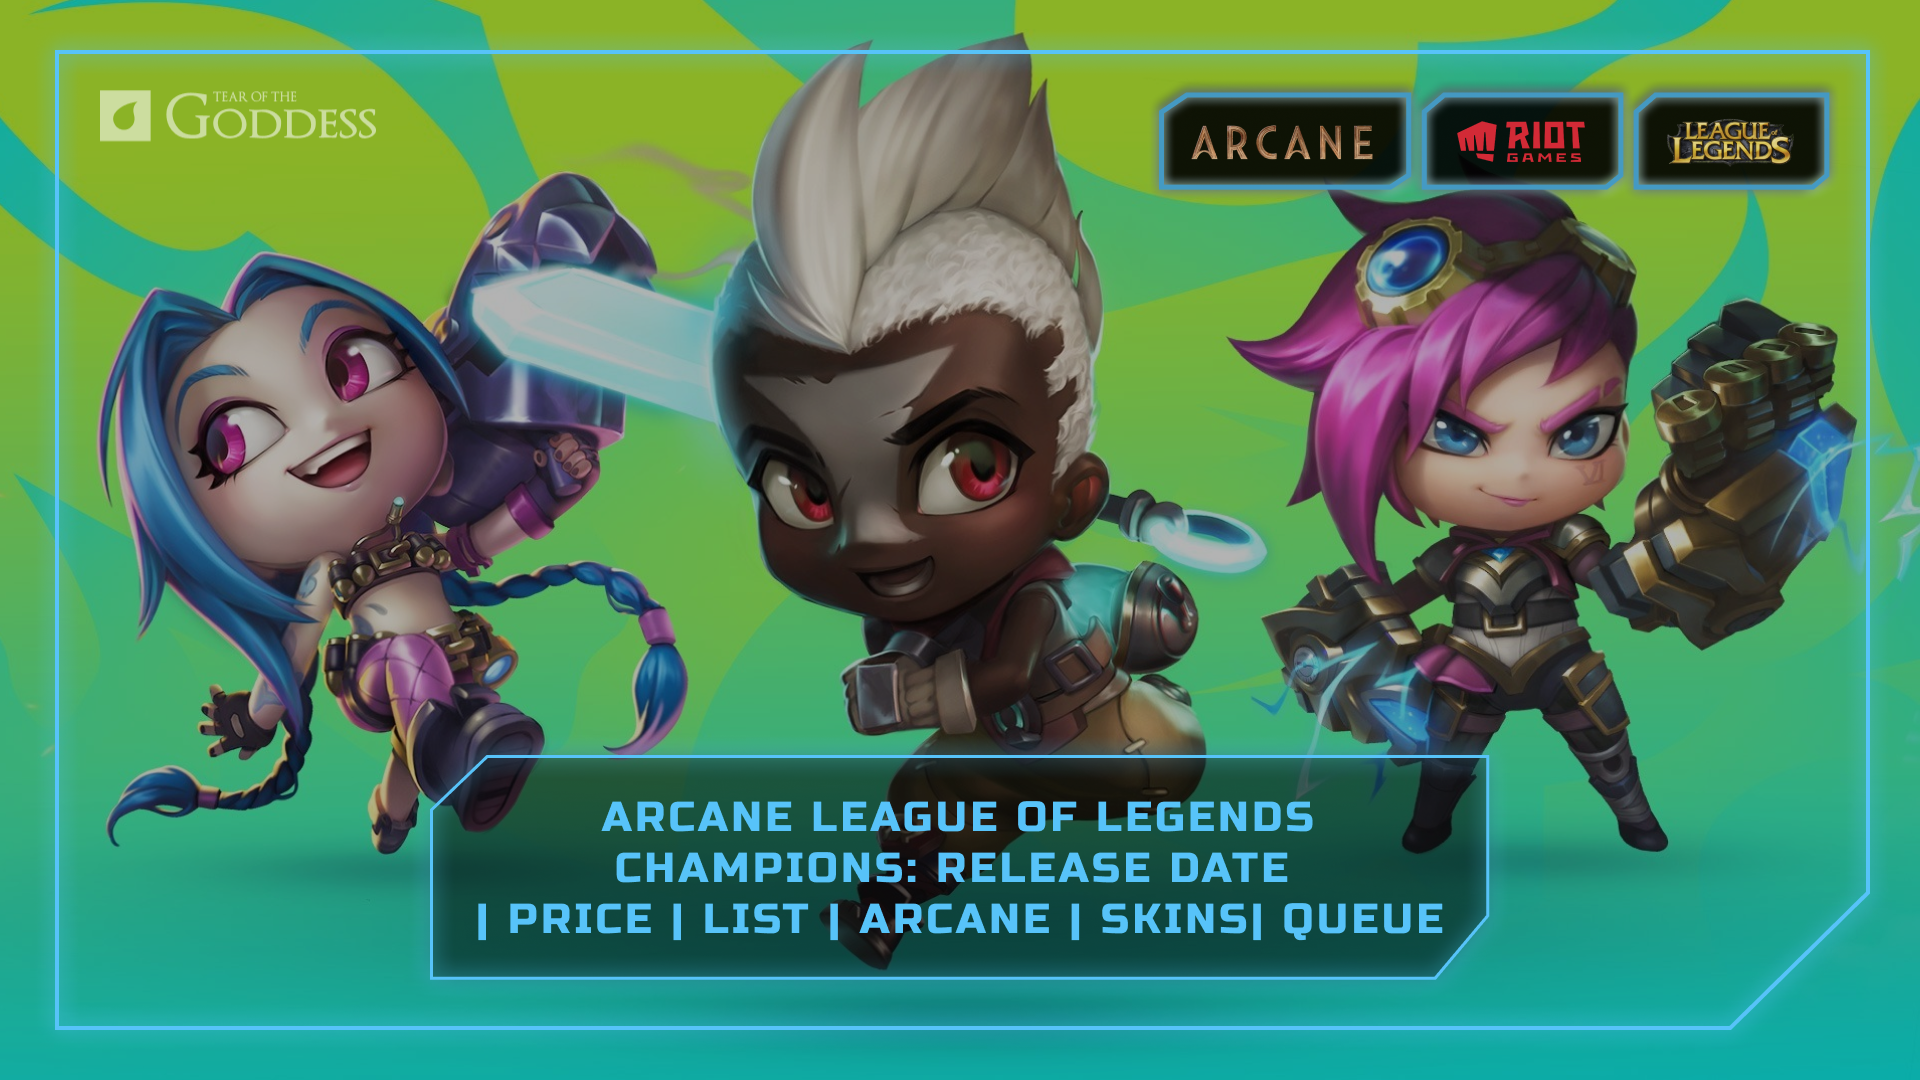 The 8 League of Legends Champions that Appear in Arcane